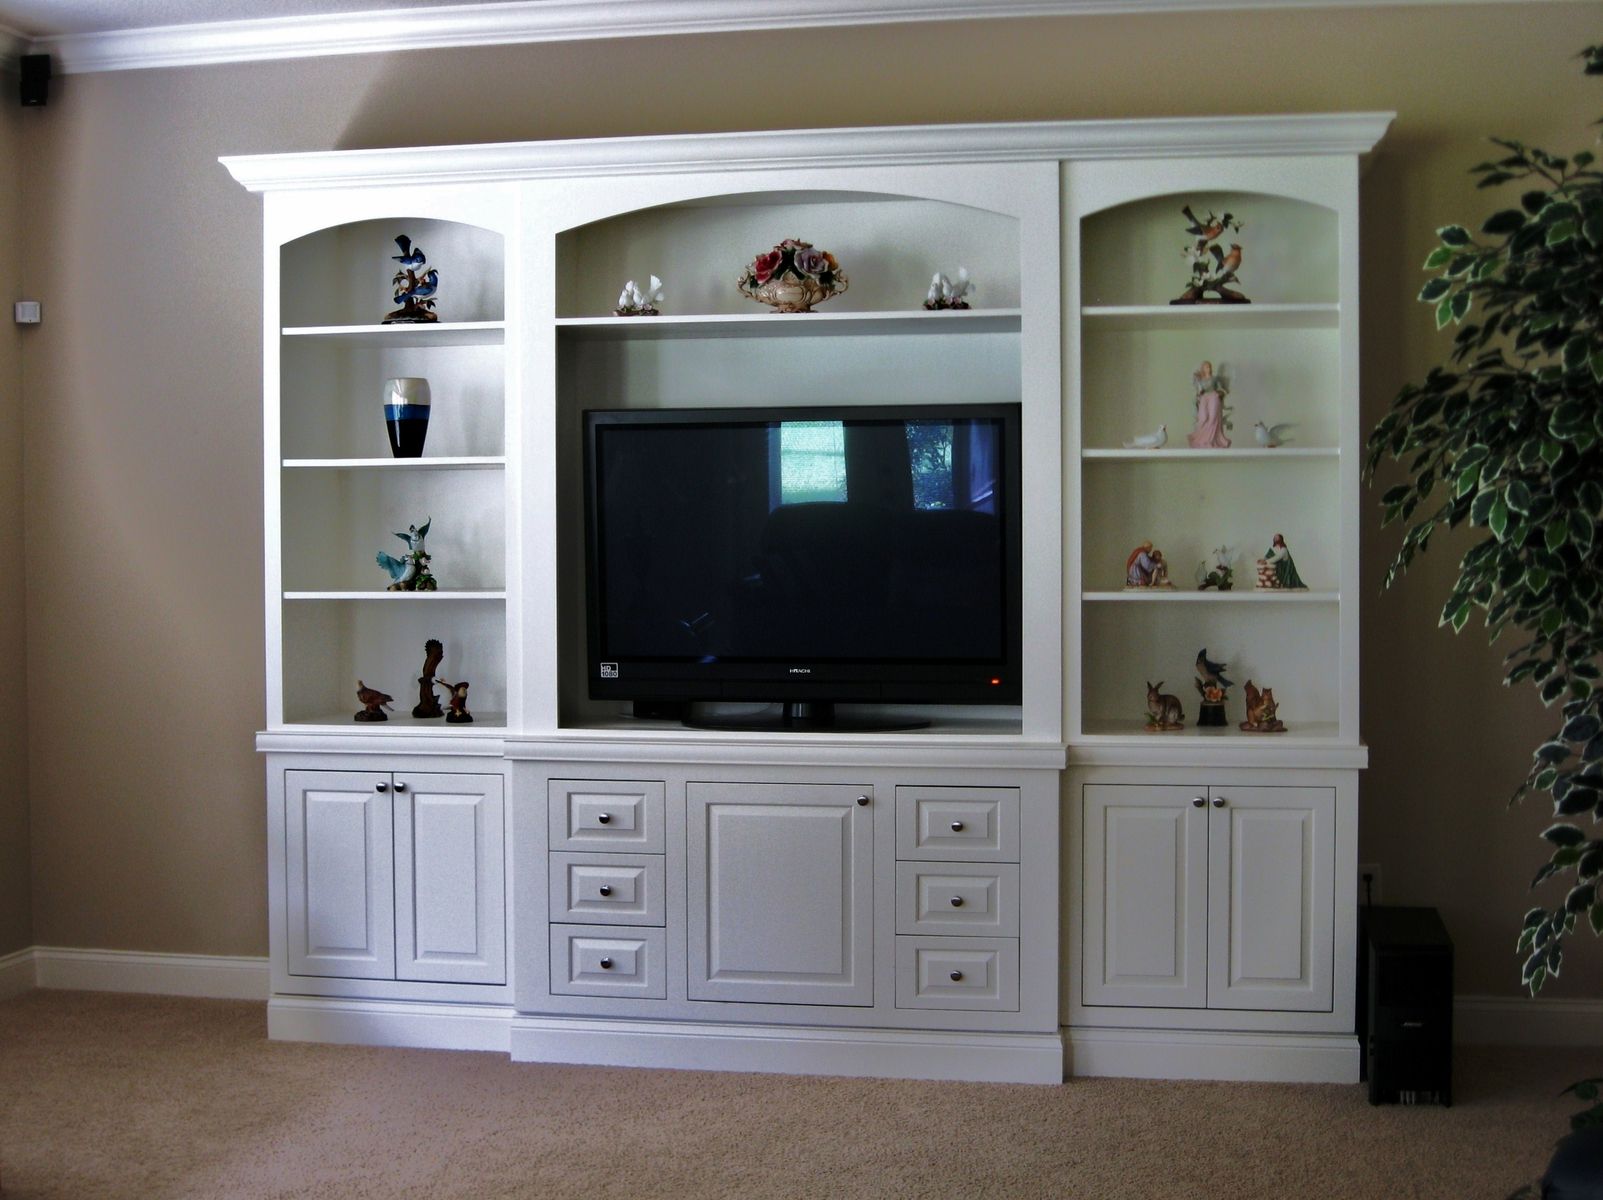  Custom  Painted Entertainment  Center  by Gideon s Cabinet  